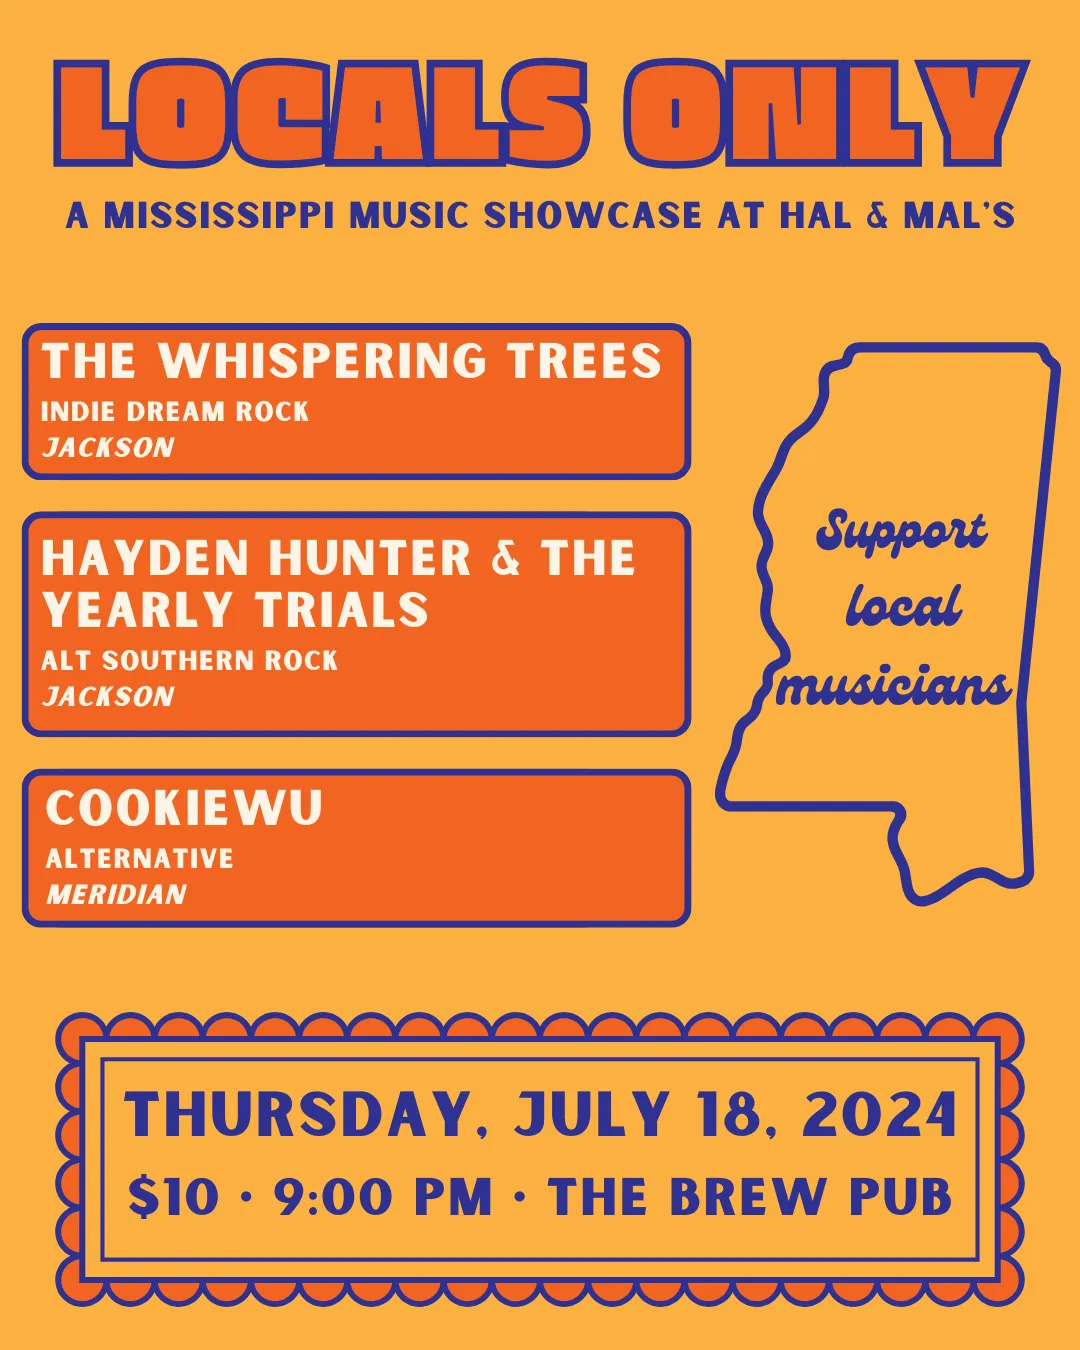 LOCALS ONLY: The Whispering Trees, Hayden Hunter & the YT’s, CookieWu